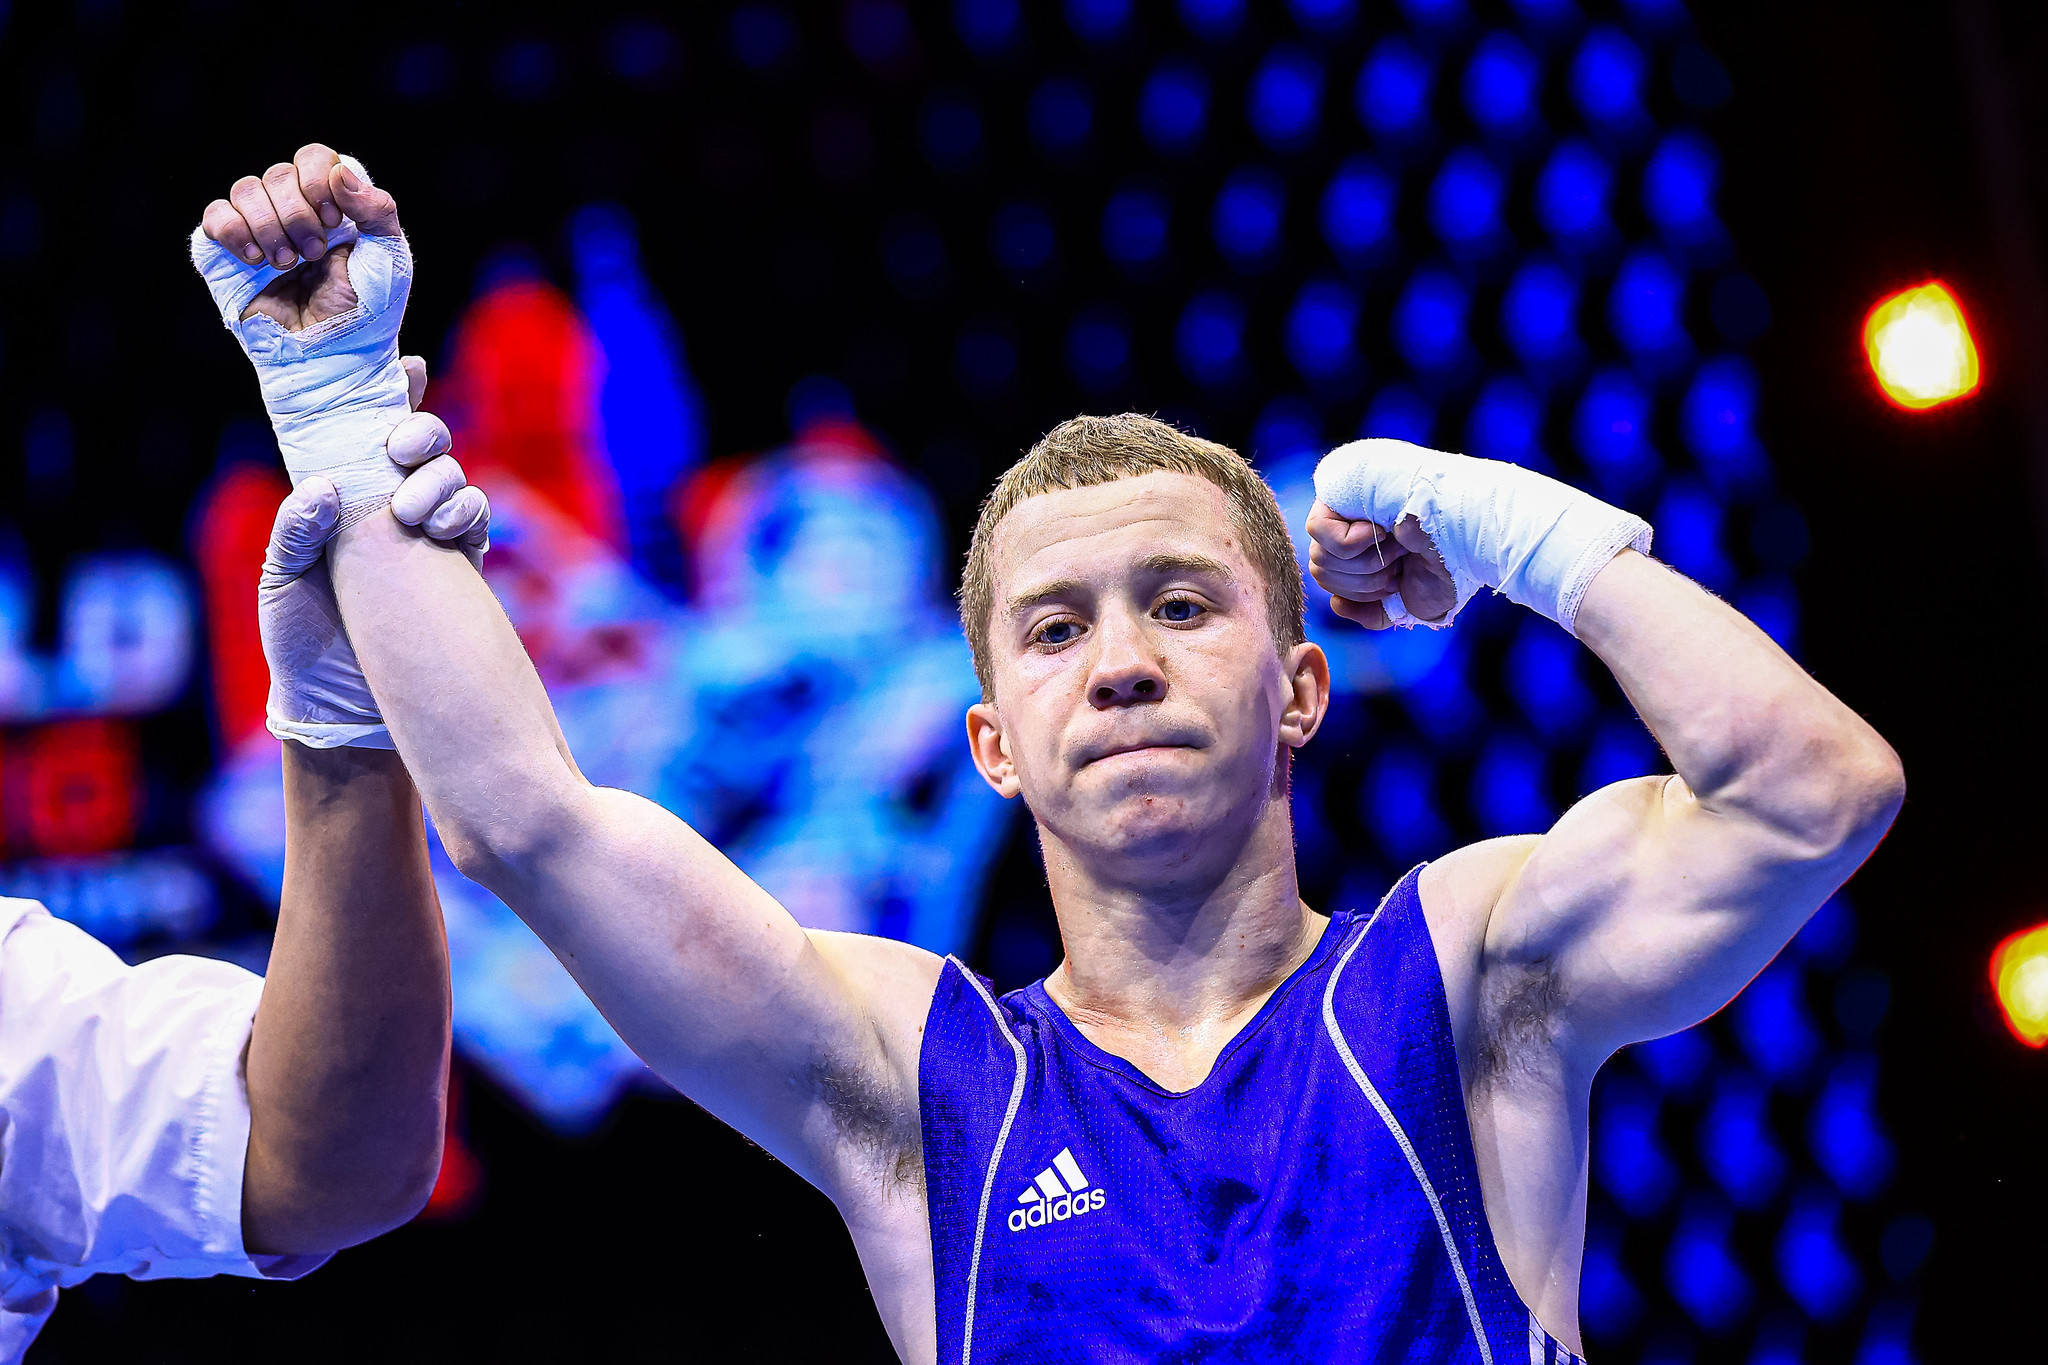 Belarus' Yauheni Karmilchyk looked dominant again in the under-48kg ©AIBA